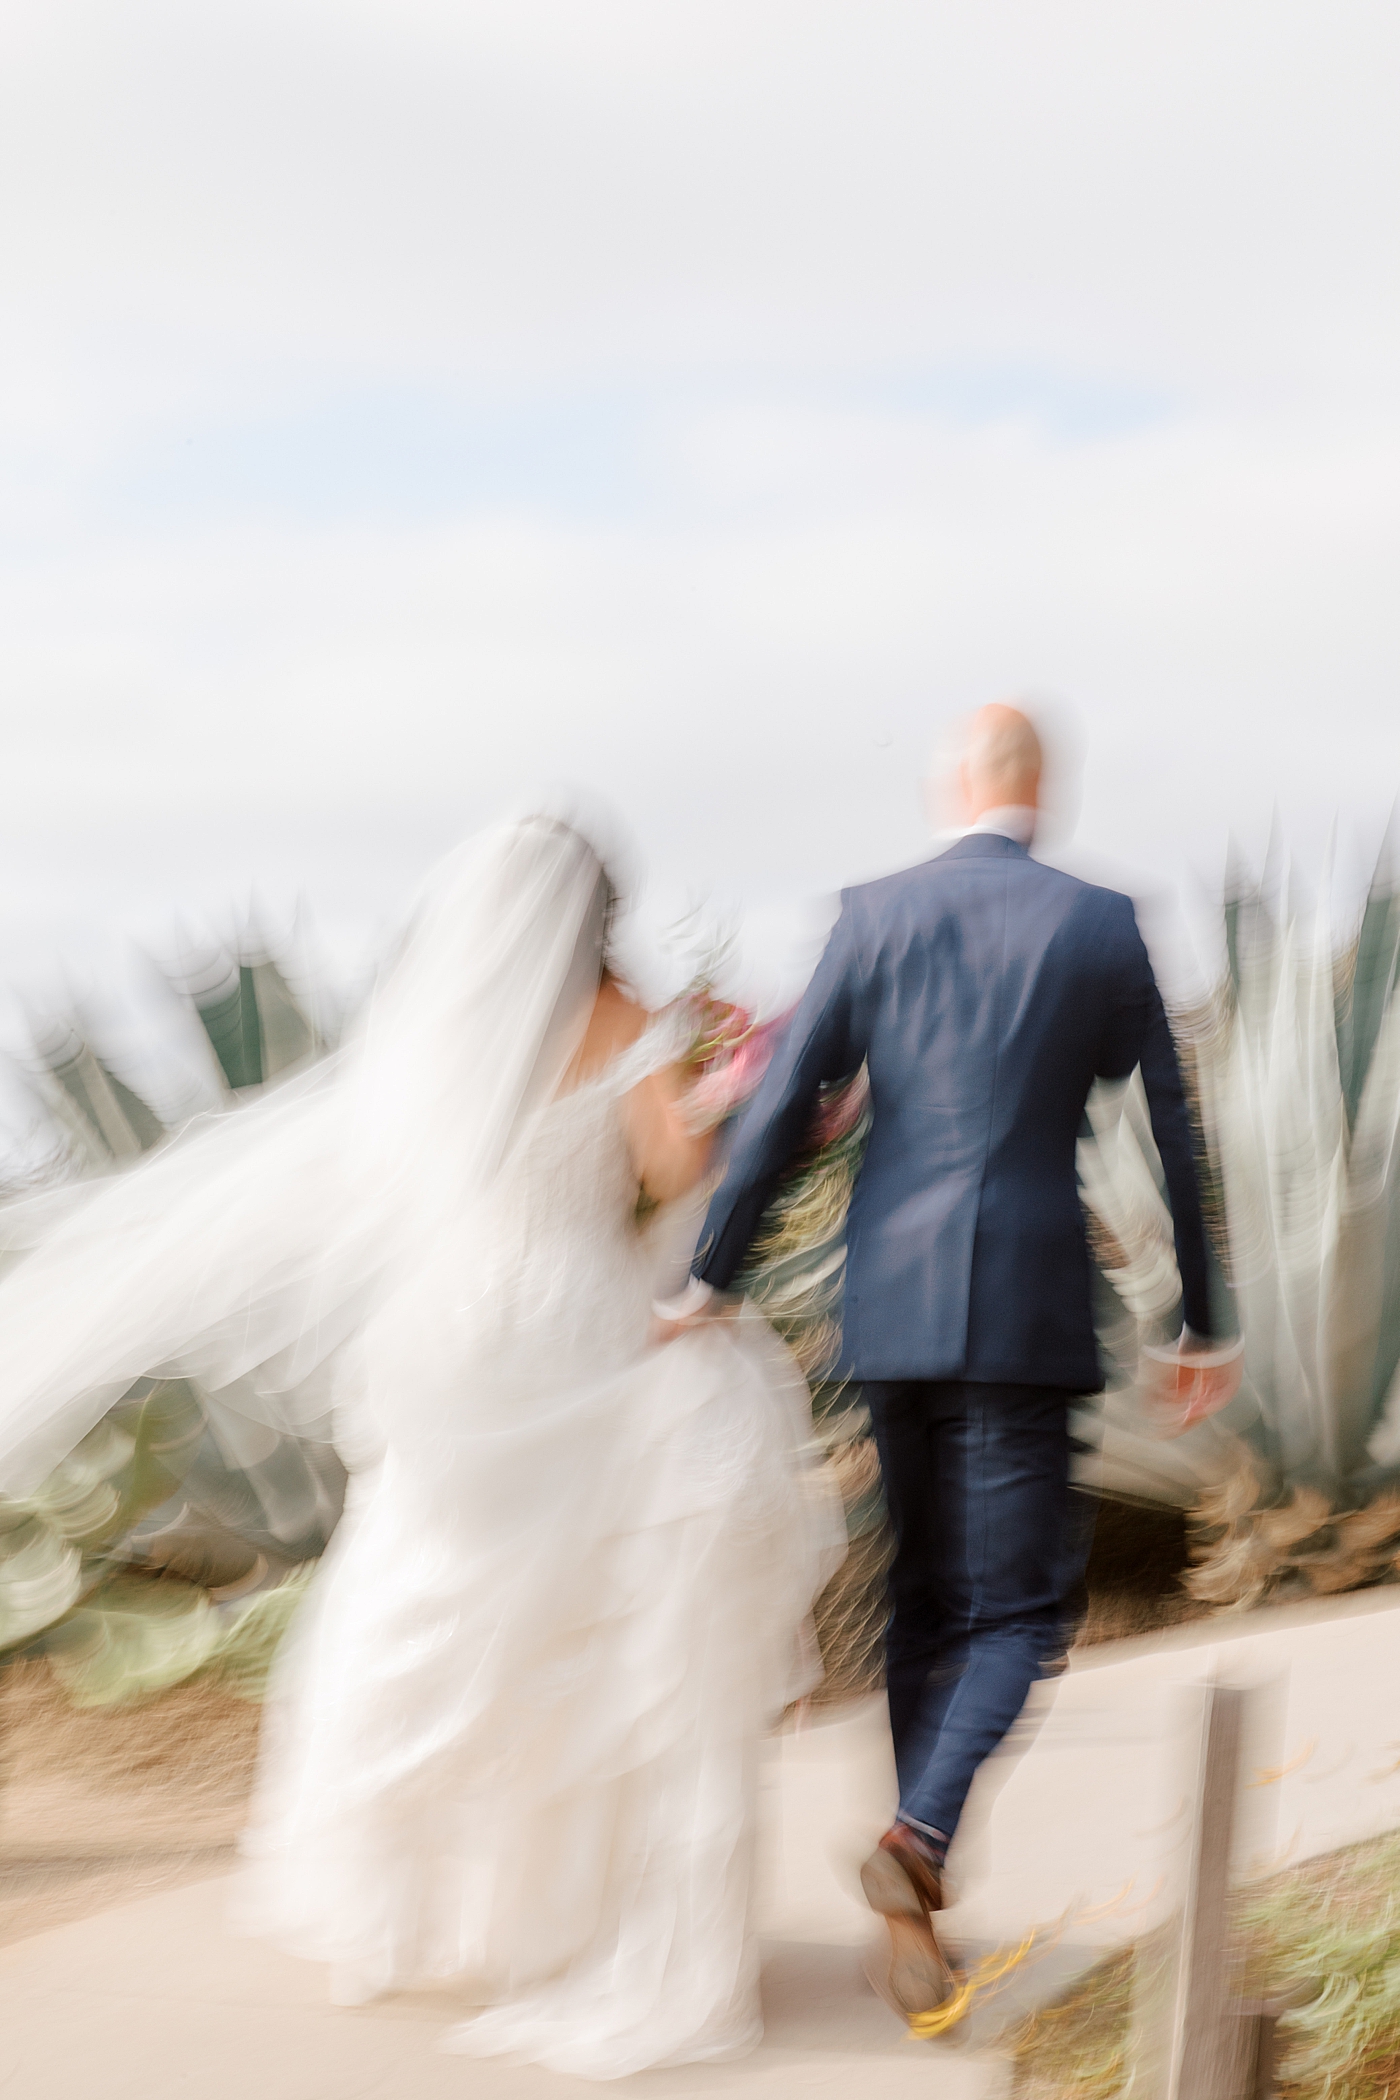 Blurry image of a groom in navy suit and bride in wedding dress holding hands while walking away from the camera on a seaside path | Image by Hope Helmuth Photography